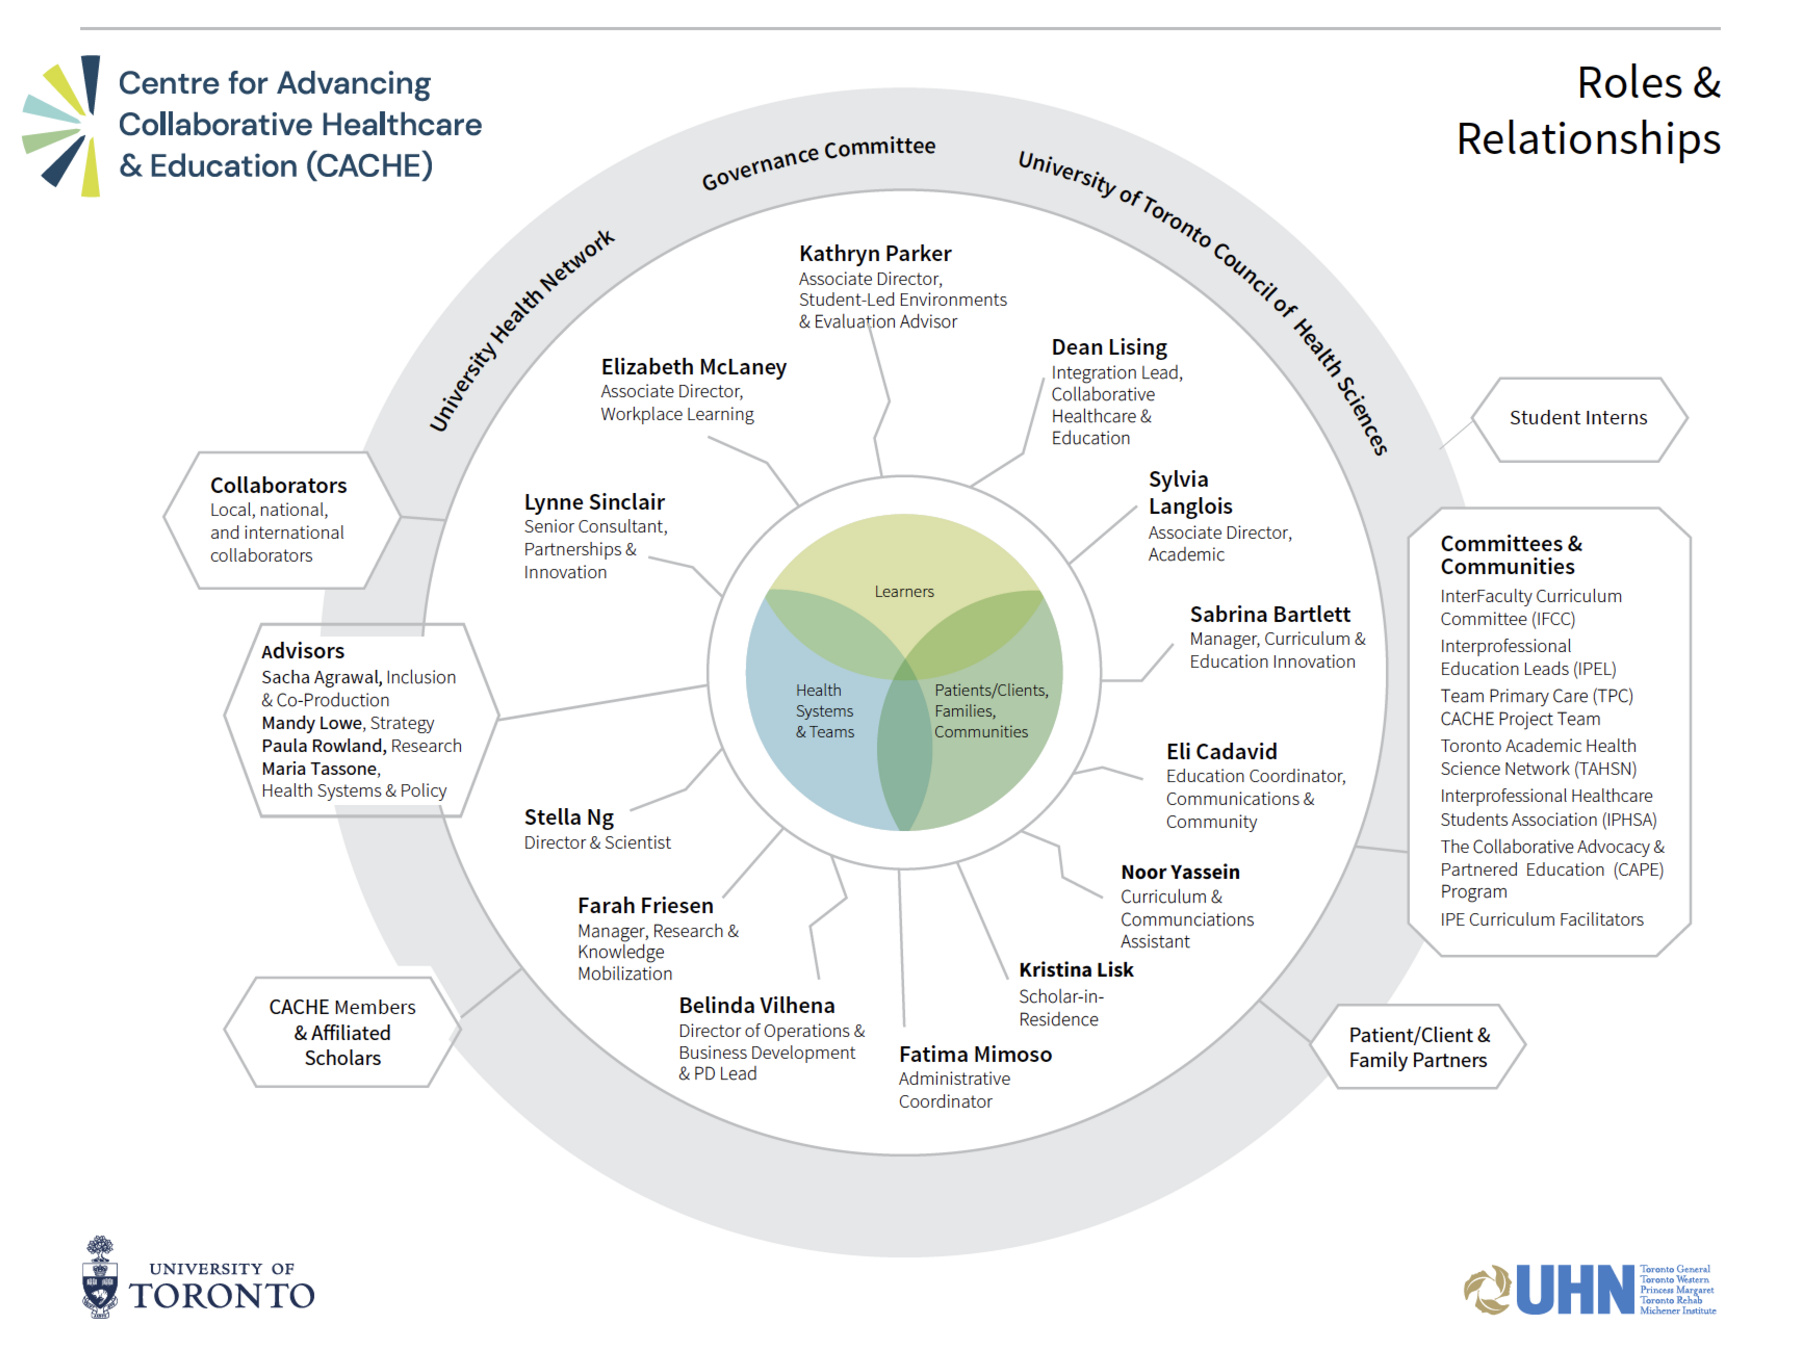 circular chart listing the members of the Centre for Advancing Collaborative Healthcare & Education (CACHE), and their roles, titled "Roles & Relationships".